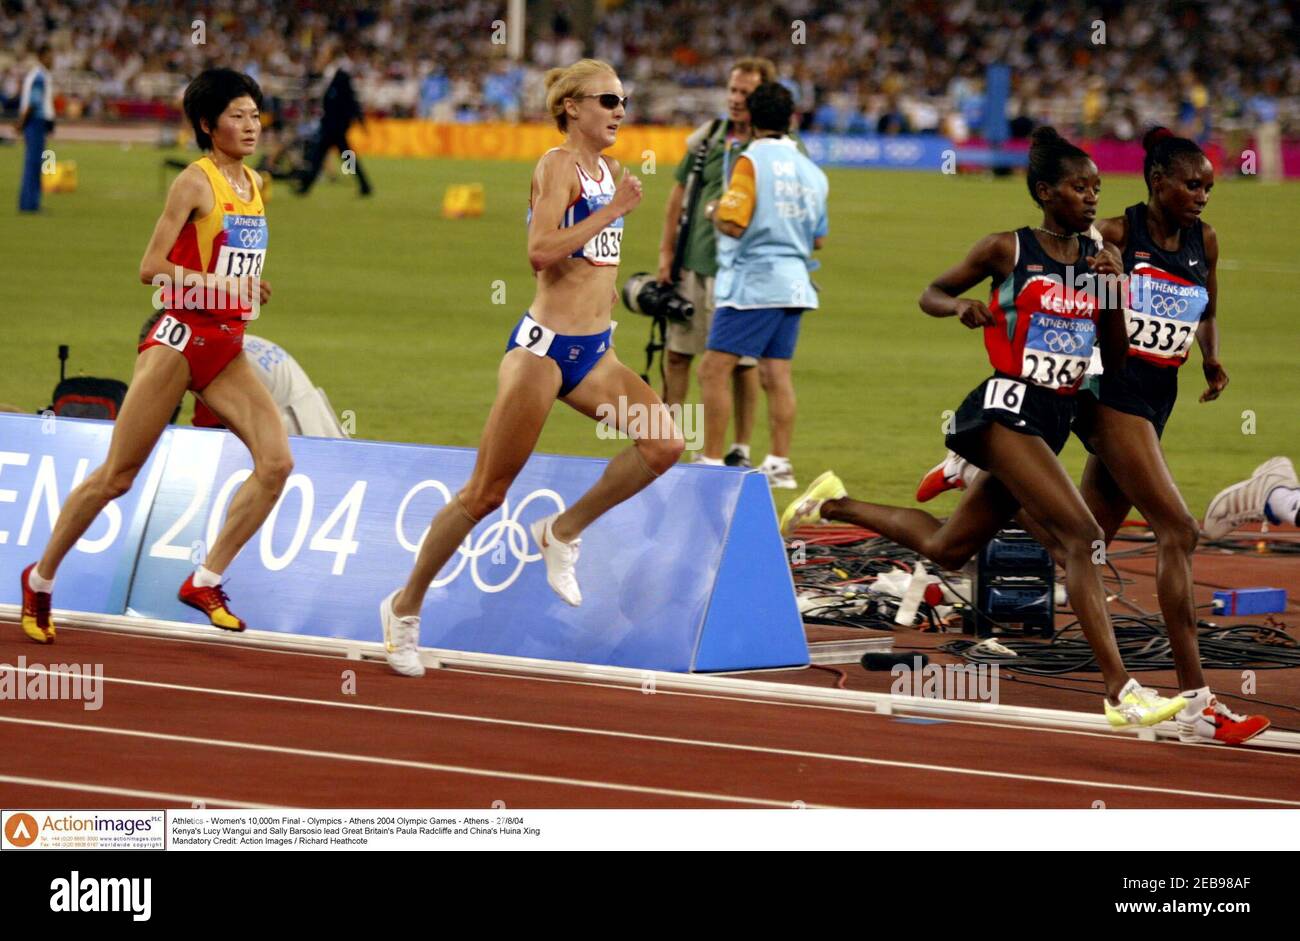 Athletics - Women's 10,000m Final - Olympics - Athens 2004 Olympic Games -  Athens - 27/8/04 Kenya's Lucy